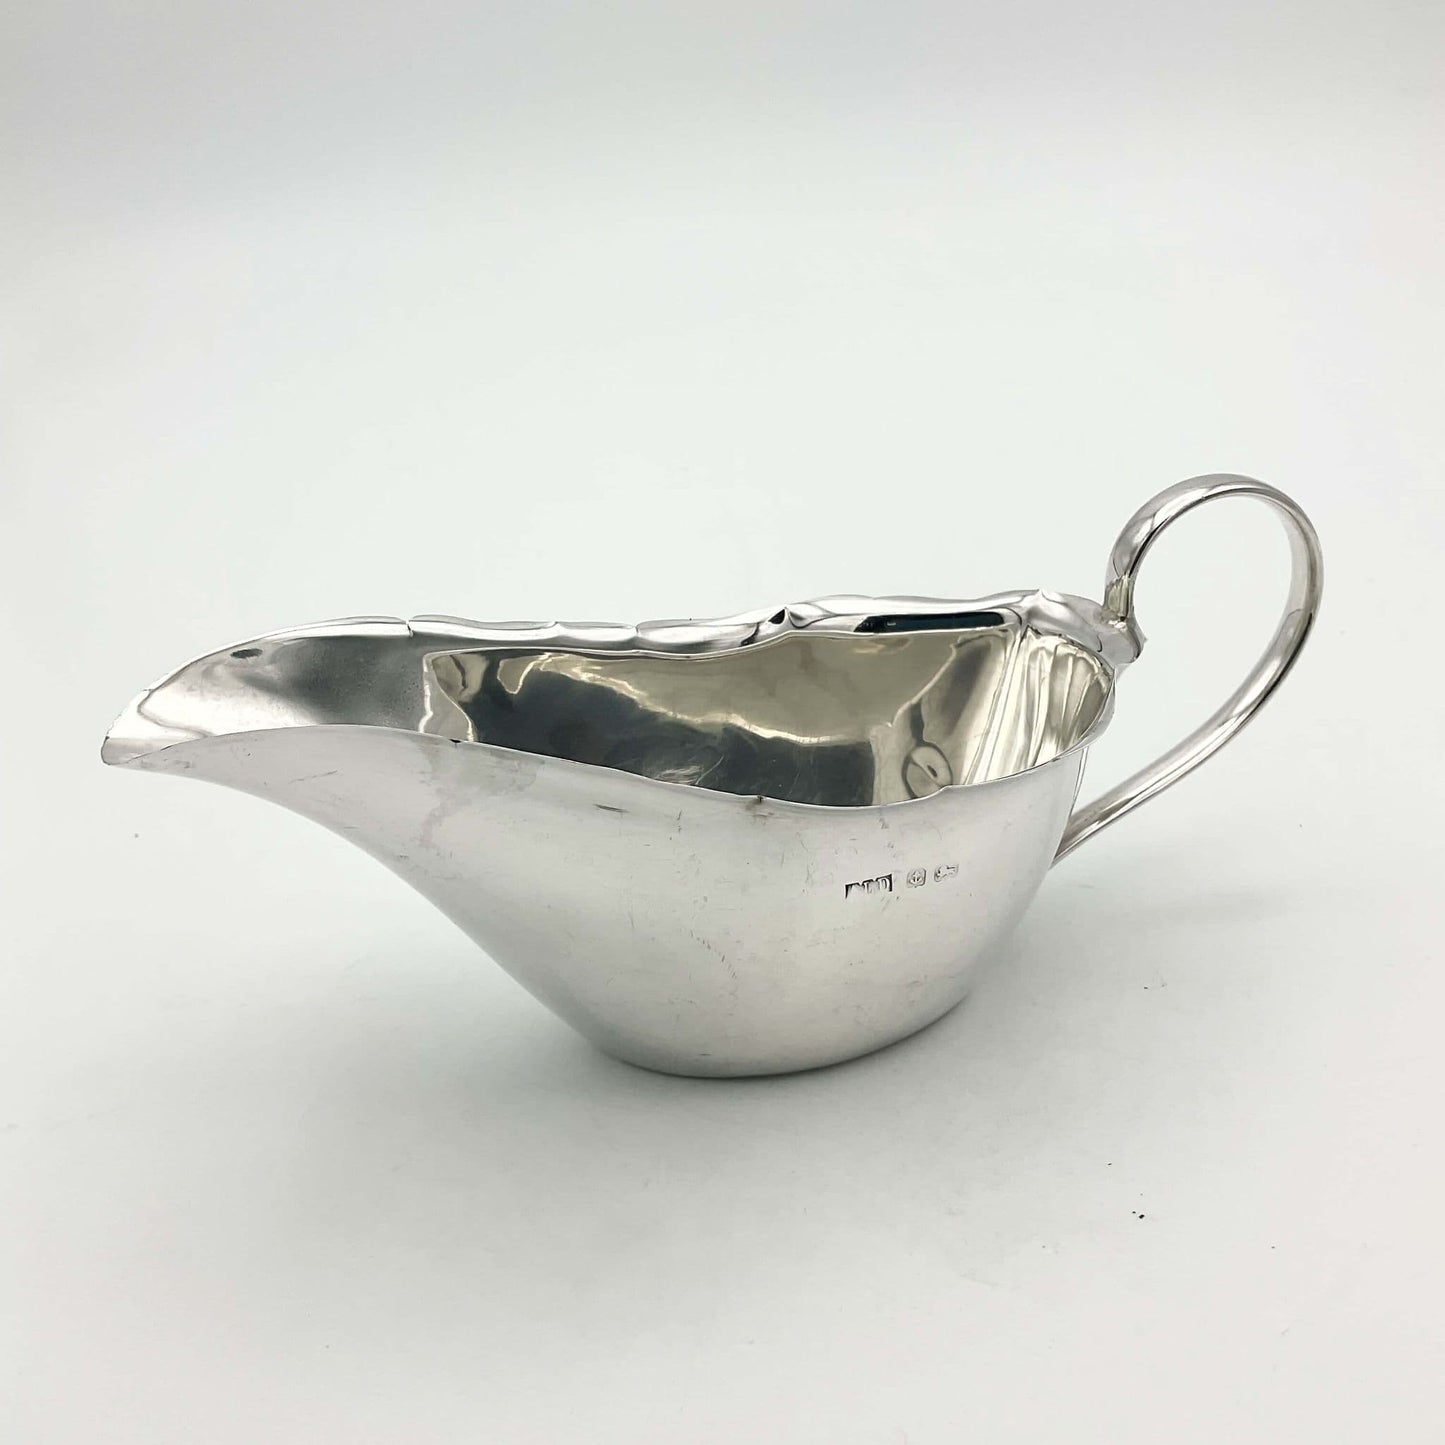 Silver sauce boat with hallmarks on white background 